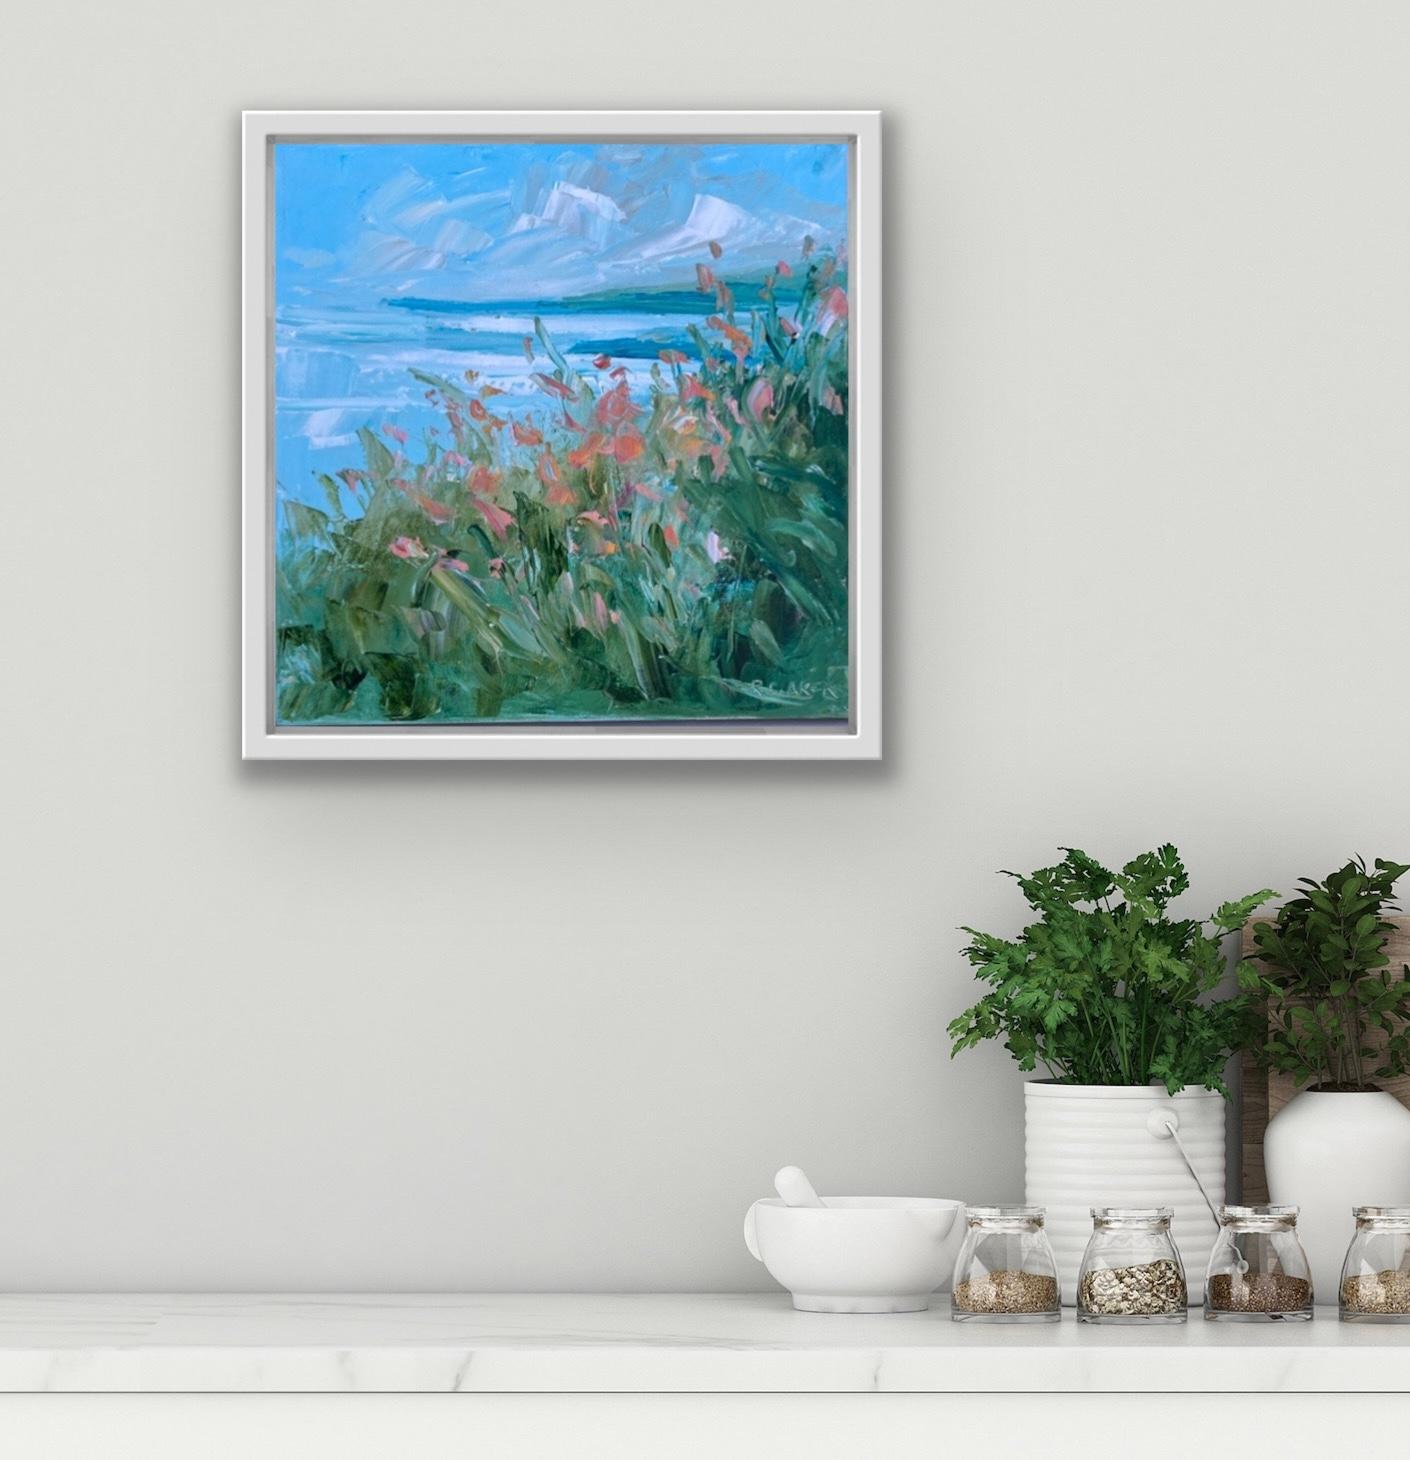 Cardigan Bay, Montbretia, Cornish Seascape Painting, Coastal Art Cornwall - Blue Abstract Painting by Rupert Aker